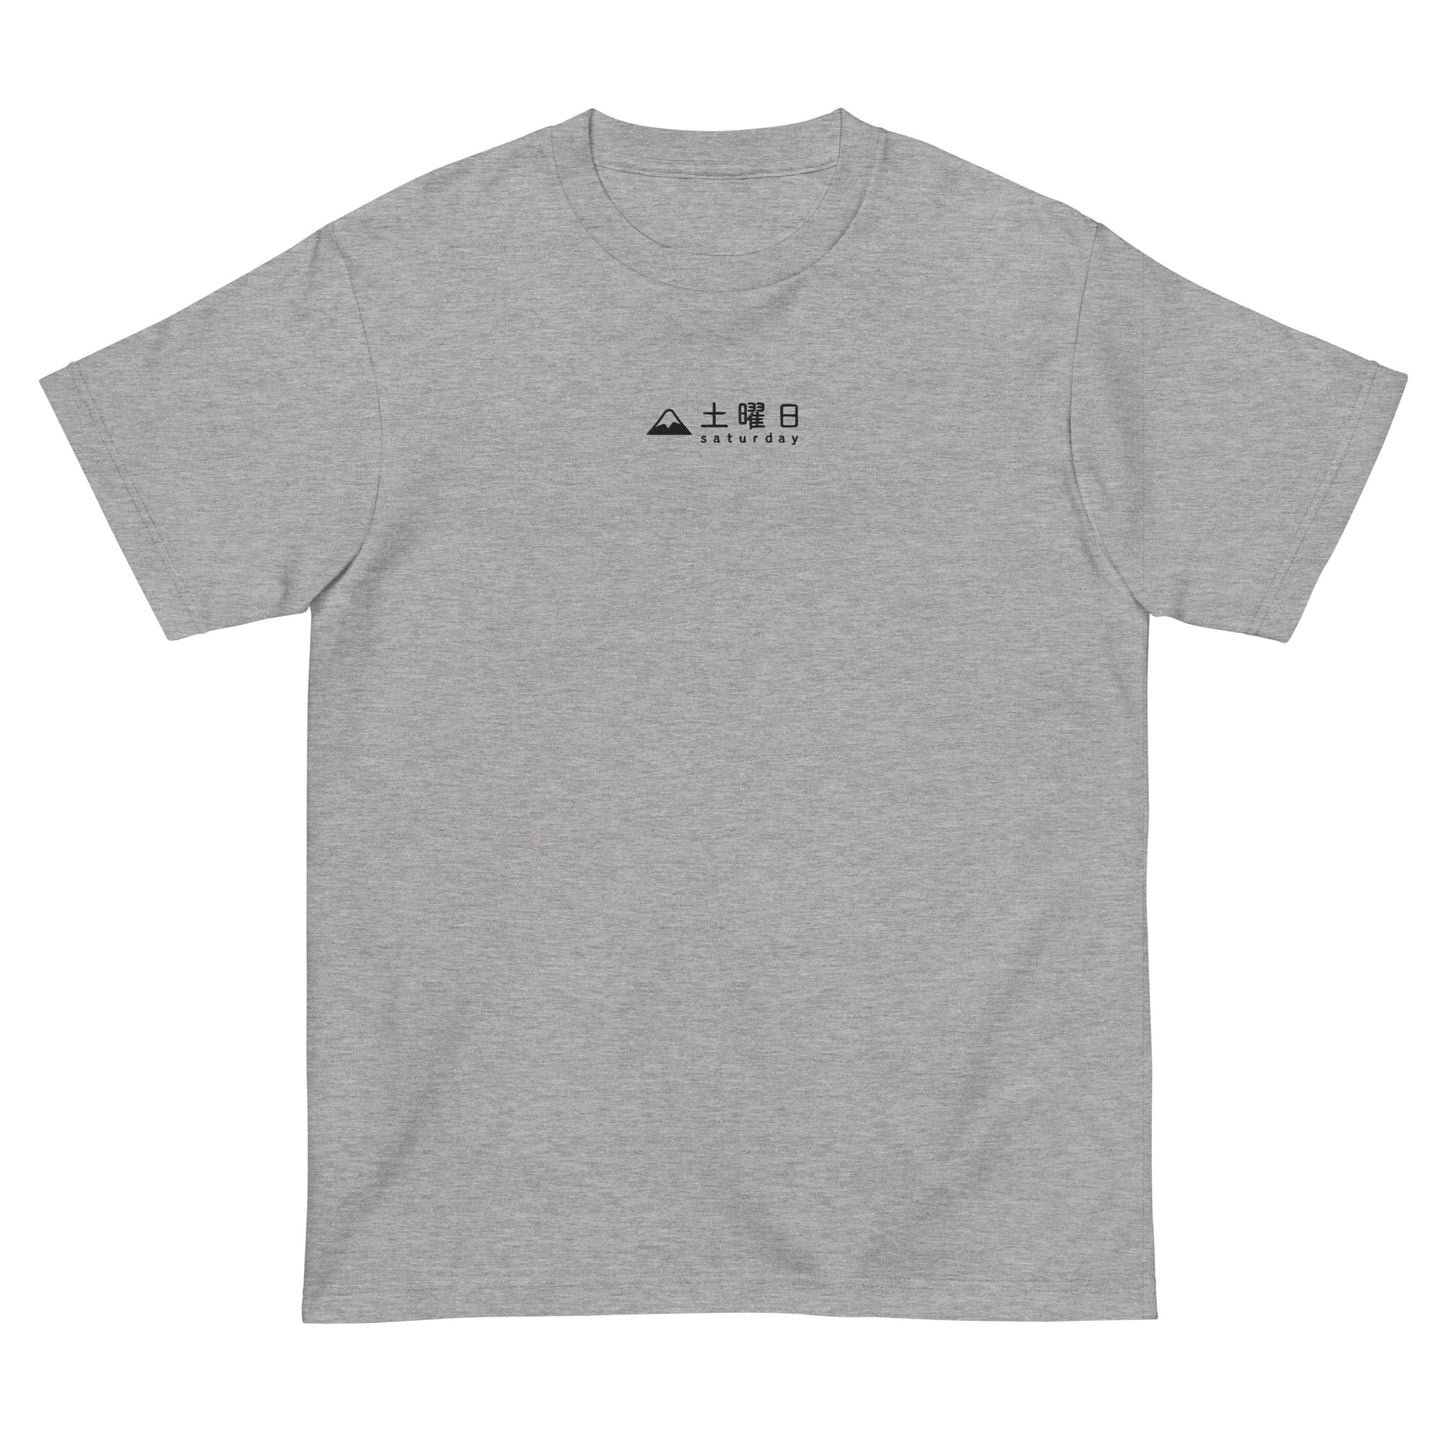 Light Gray High Quality Tee - Front Design with an Black Embroidery "Saturday" in Japanese and English